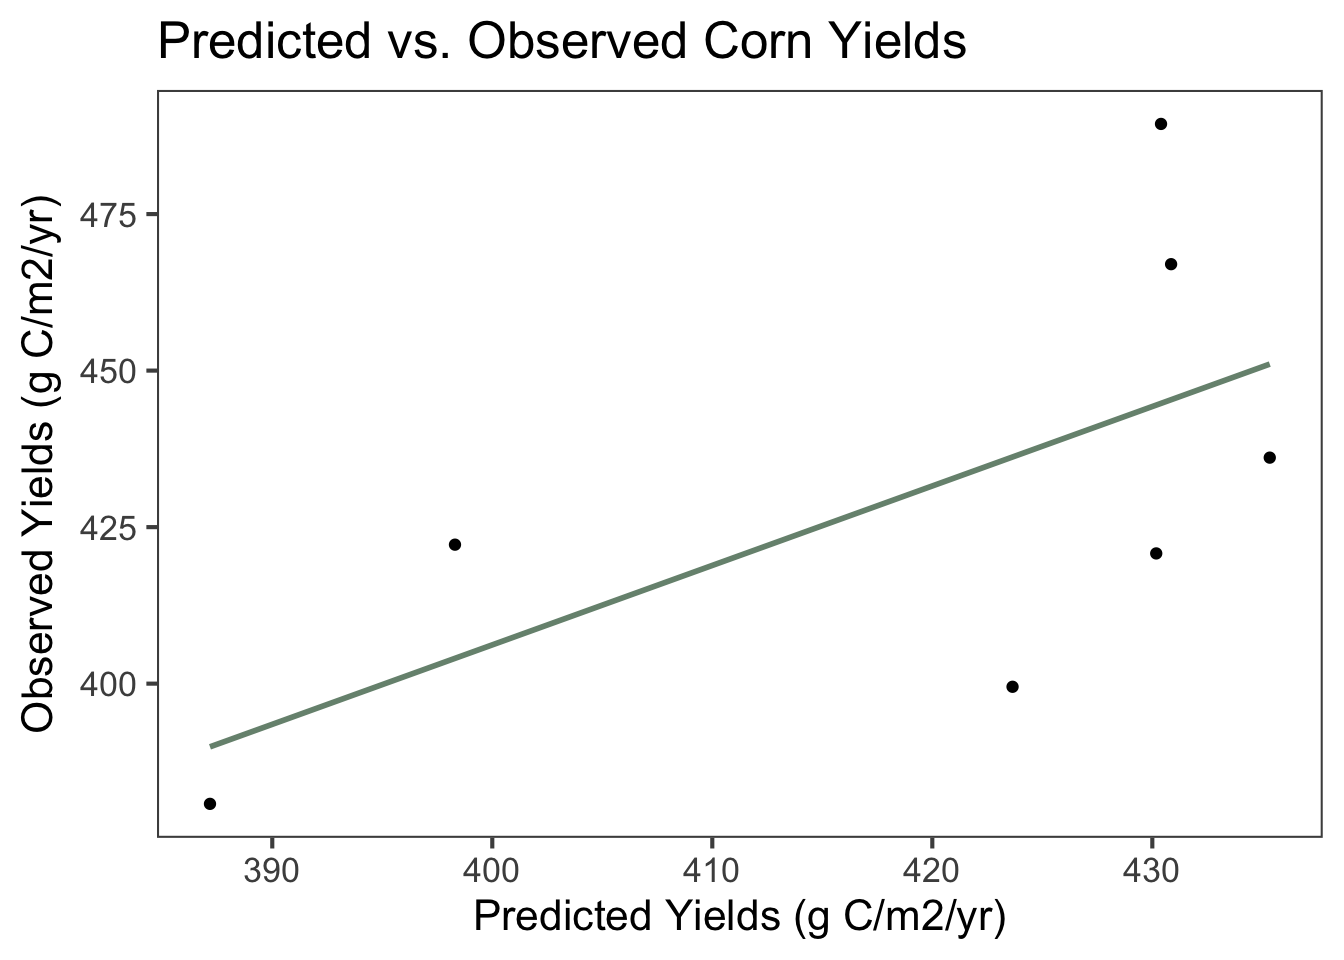 Scatterplot and linear regression line of predicted and observed corn yields in grams of carbon (C) per m2 per year between 1999 and 2013. The equation of the line is 0.320x + 282, demonstrating that observed yields were higher than predicted yields on average. The multiple R2 value is 0.406 and the adjusted R2 value is 0.287, indicating that the linear relationship is weak. The p-value is 0.124, a little higher than what is generally considered to be significant.